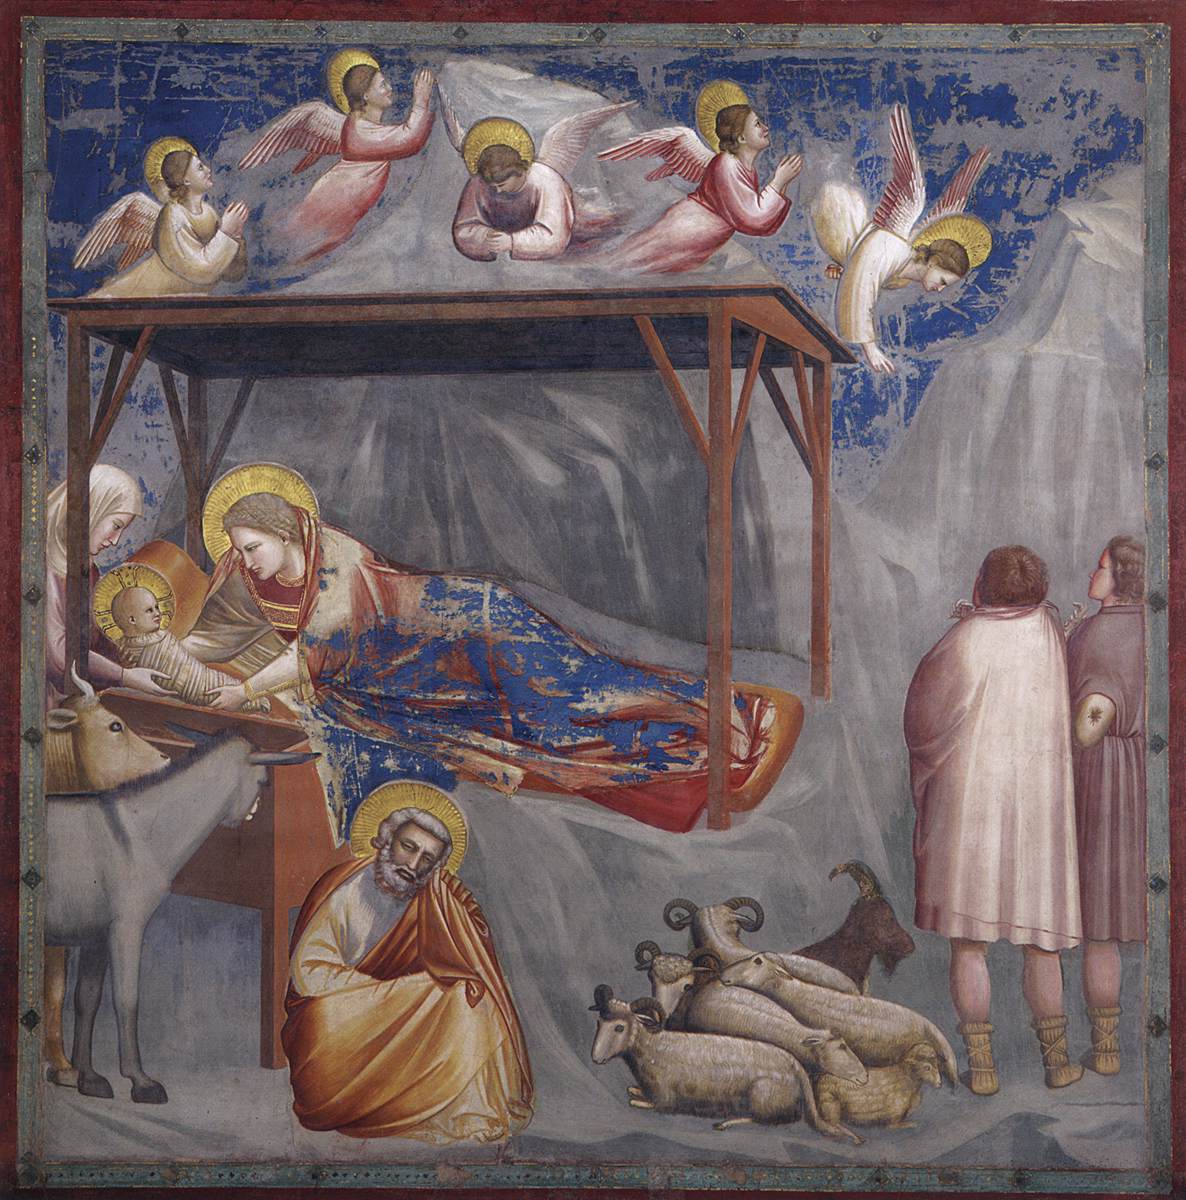 No 17 Scenes from the Life of Christ: 1 The Nativity: The Birth of Christ